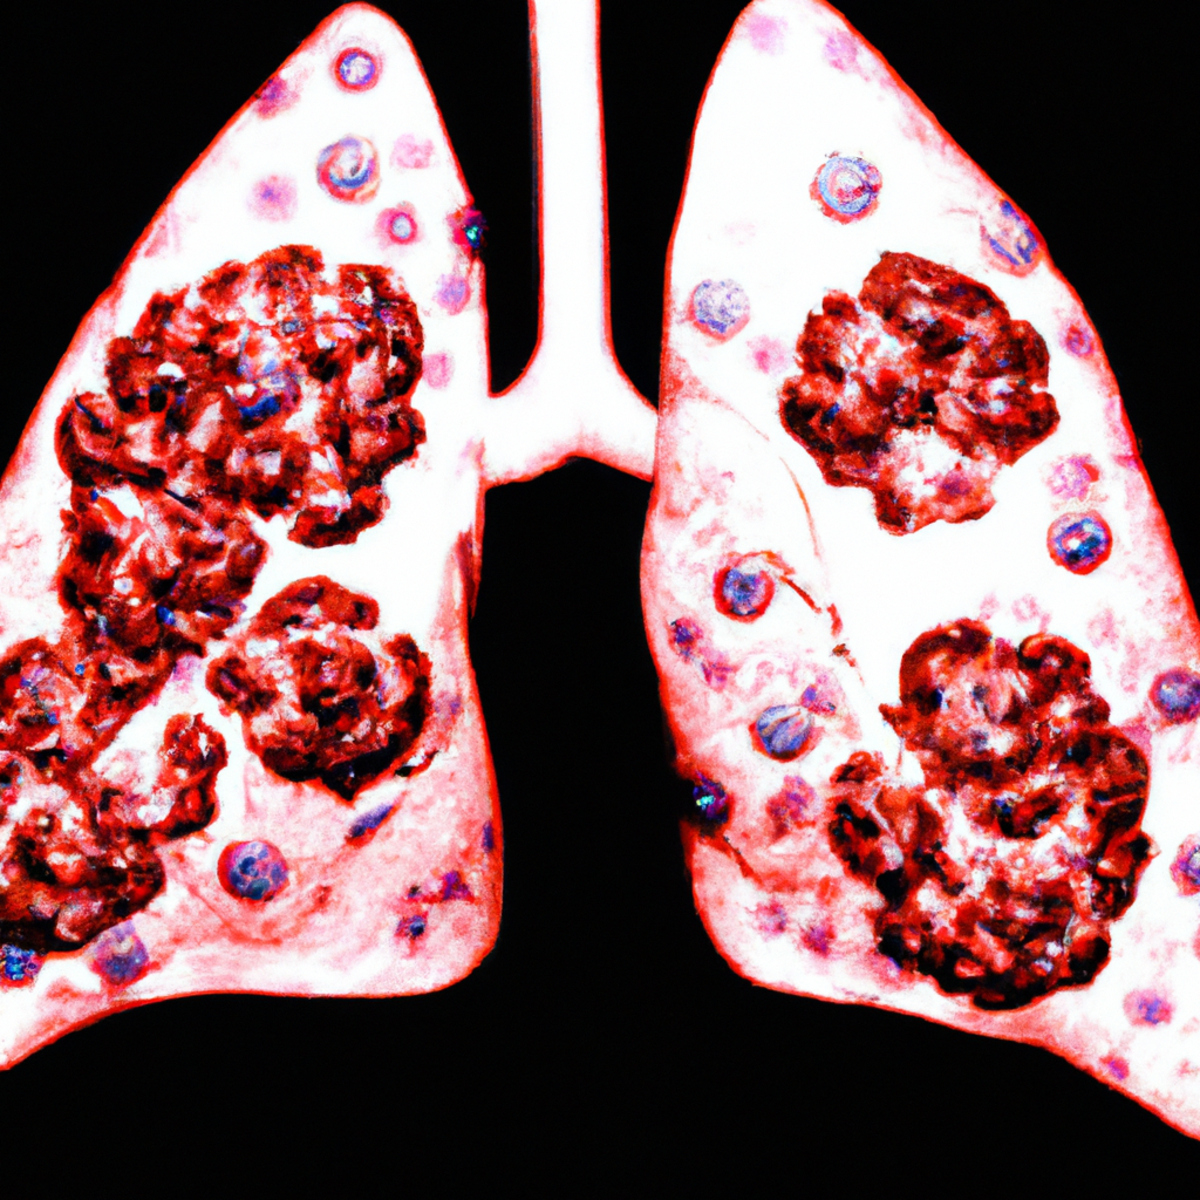 Close-up of healthy lung affected by Pulmonary Alveolar Proteinosis (PAP), showcasing milky alveoli filled with proteinaceous material.